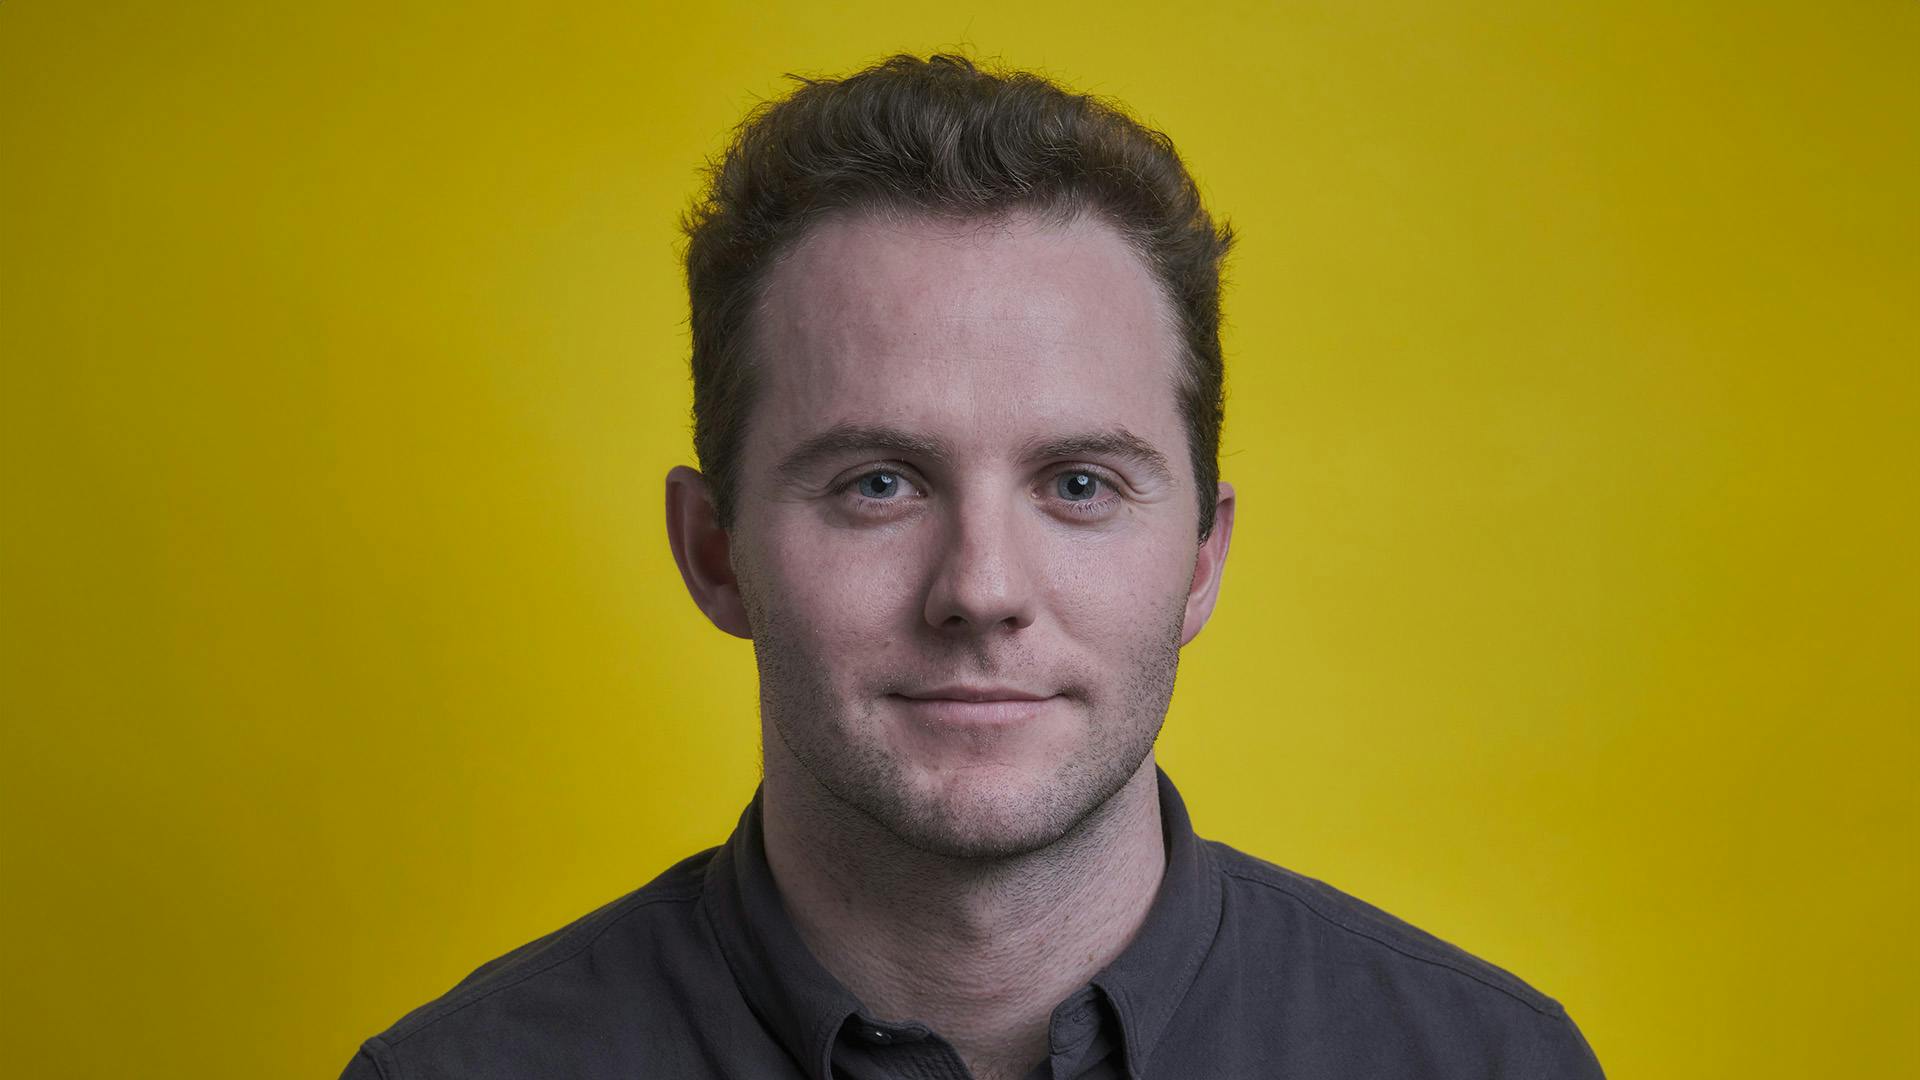 Lucas Lovell: Director of Product at Paddle